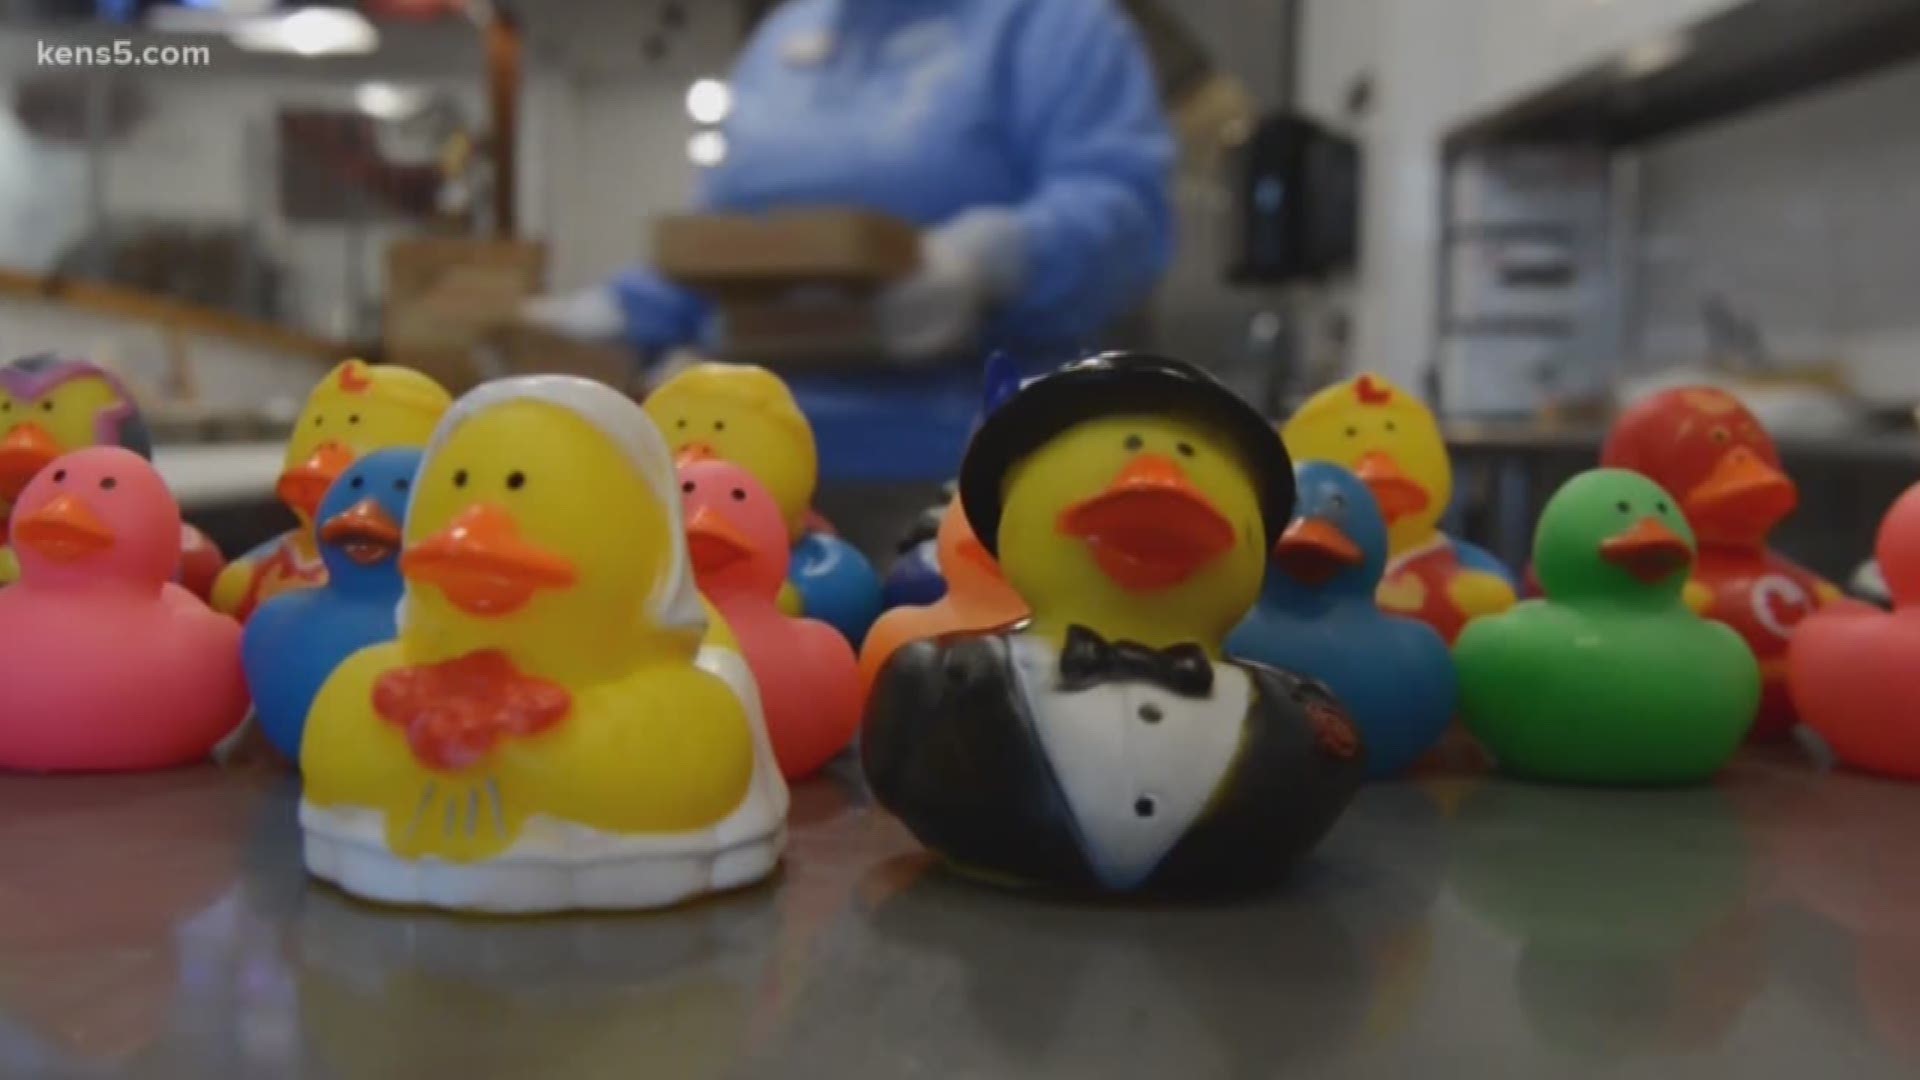 Pop into Duck Donuts for National Rubber Ducky Day. Digital journalist Lexi Hazlett shares why their promotion is all it's "quacked" up to be...